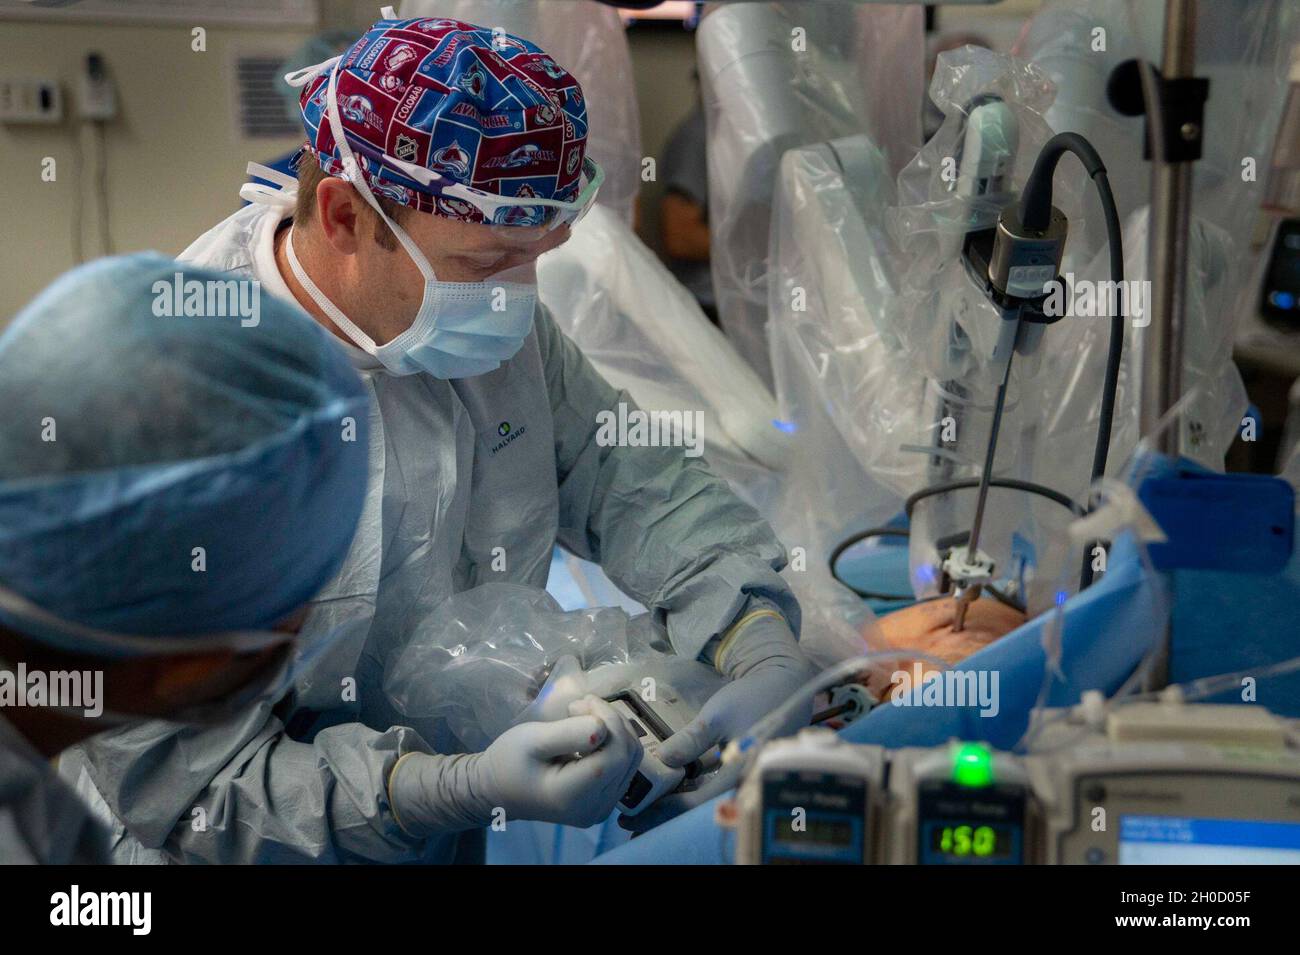 210127-N-LW757-1026  SAN DIEGO (Jan. 27, 2020) Jesse Bandle, a staff surgeon assigned to Naval Medical Center San Diego's (NMCSD) Main Operating Room (right), along with other surgical staff prepare a patient for a robotic-assisted laparoscopic inguinal hernia repair procedure in one of the hospital's operating rooms Jan. 27. Robotic surgical systems, like those used at NMCSD, allow surgeons to perform minimally-invasive procedures, and this procedure was performed during a remote, tele-mentoring study. NMCSD’s mission is to prepare service members to deploy in support of operational forces, d Stock Photo